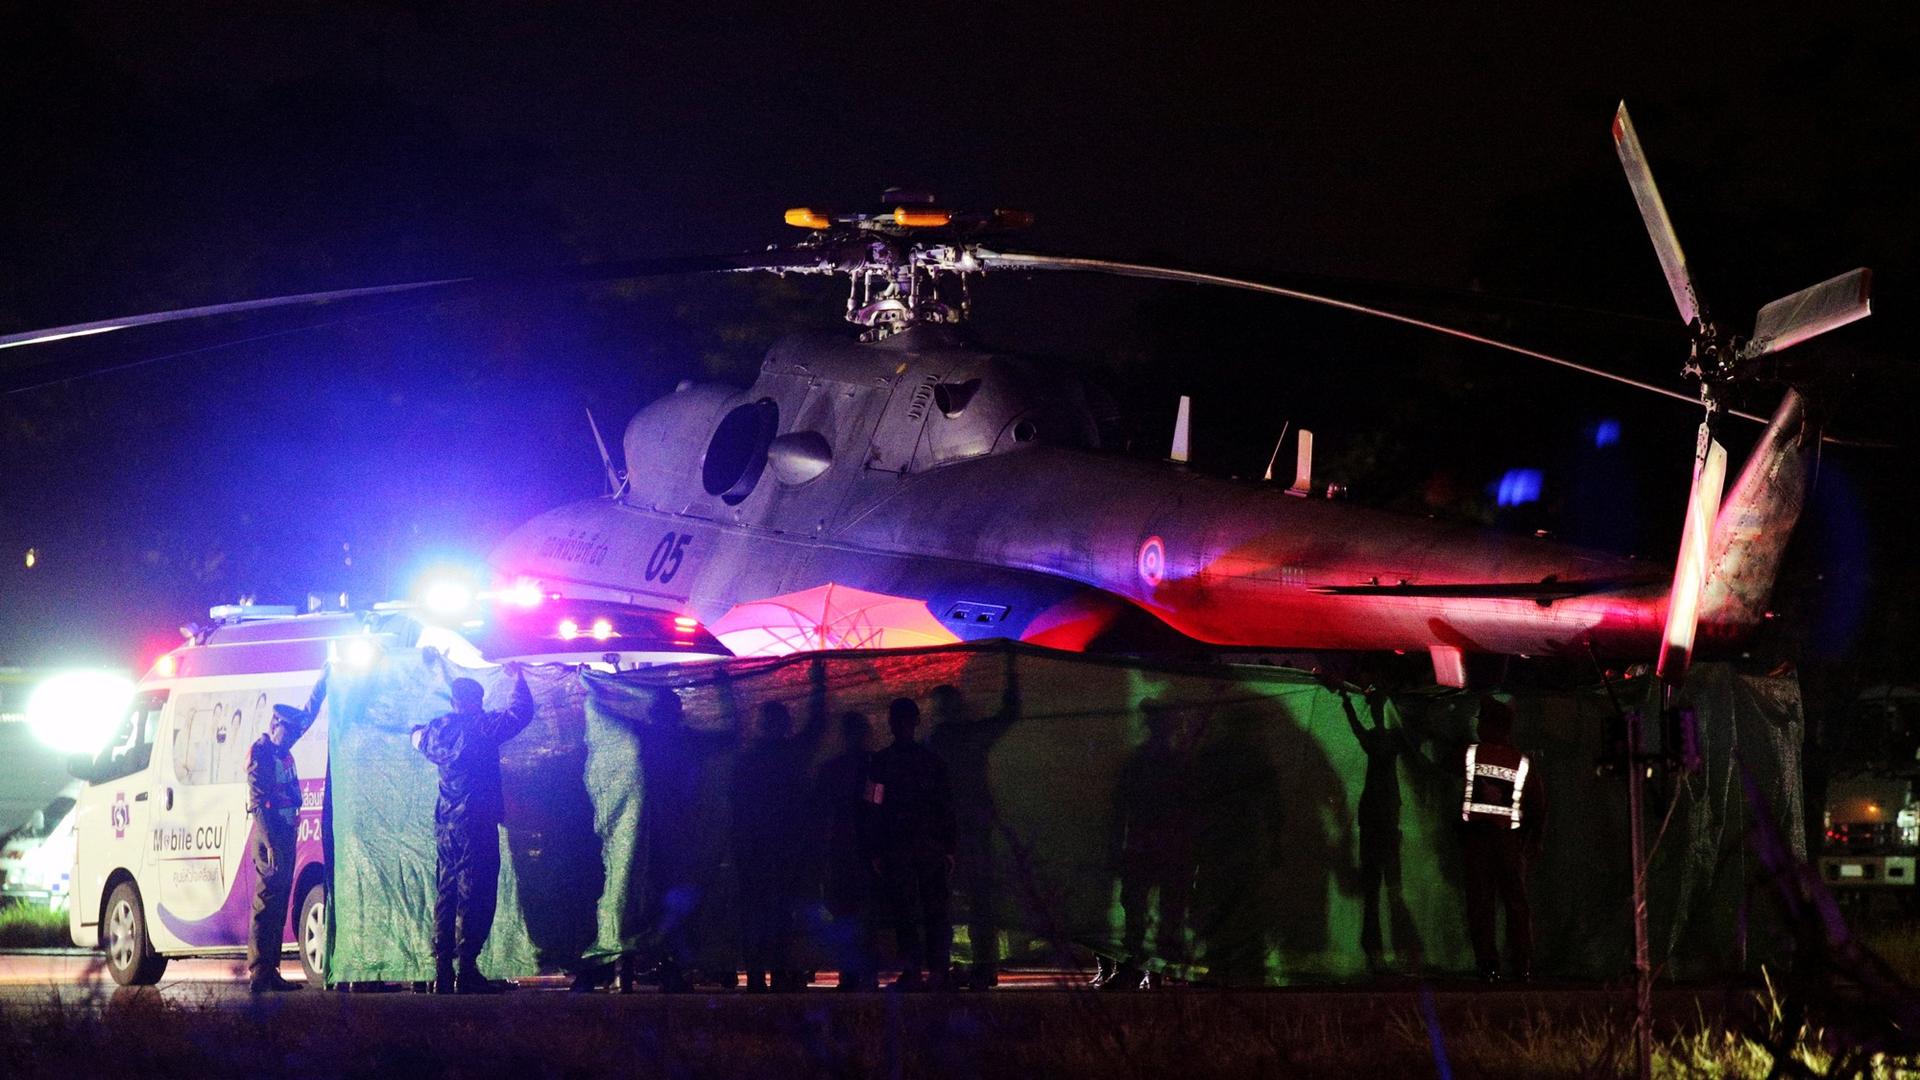 A military helicopter is shown in a photograph taken at night in Chiang Rai, Thailand.